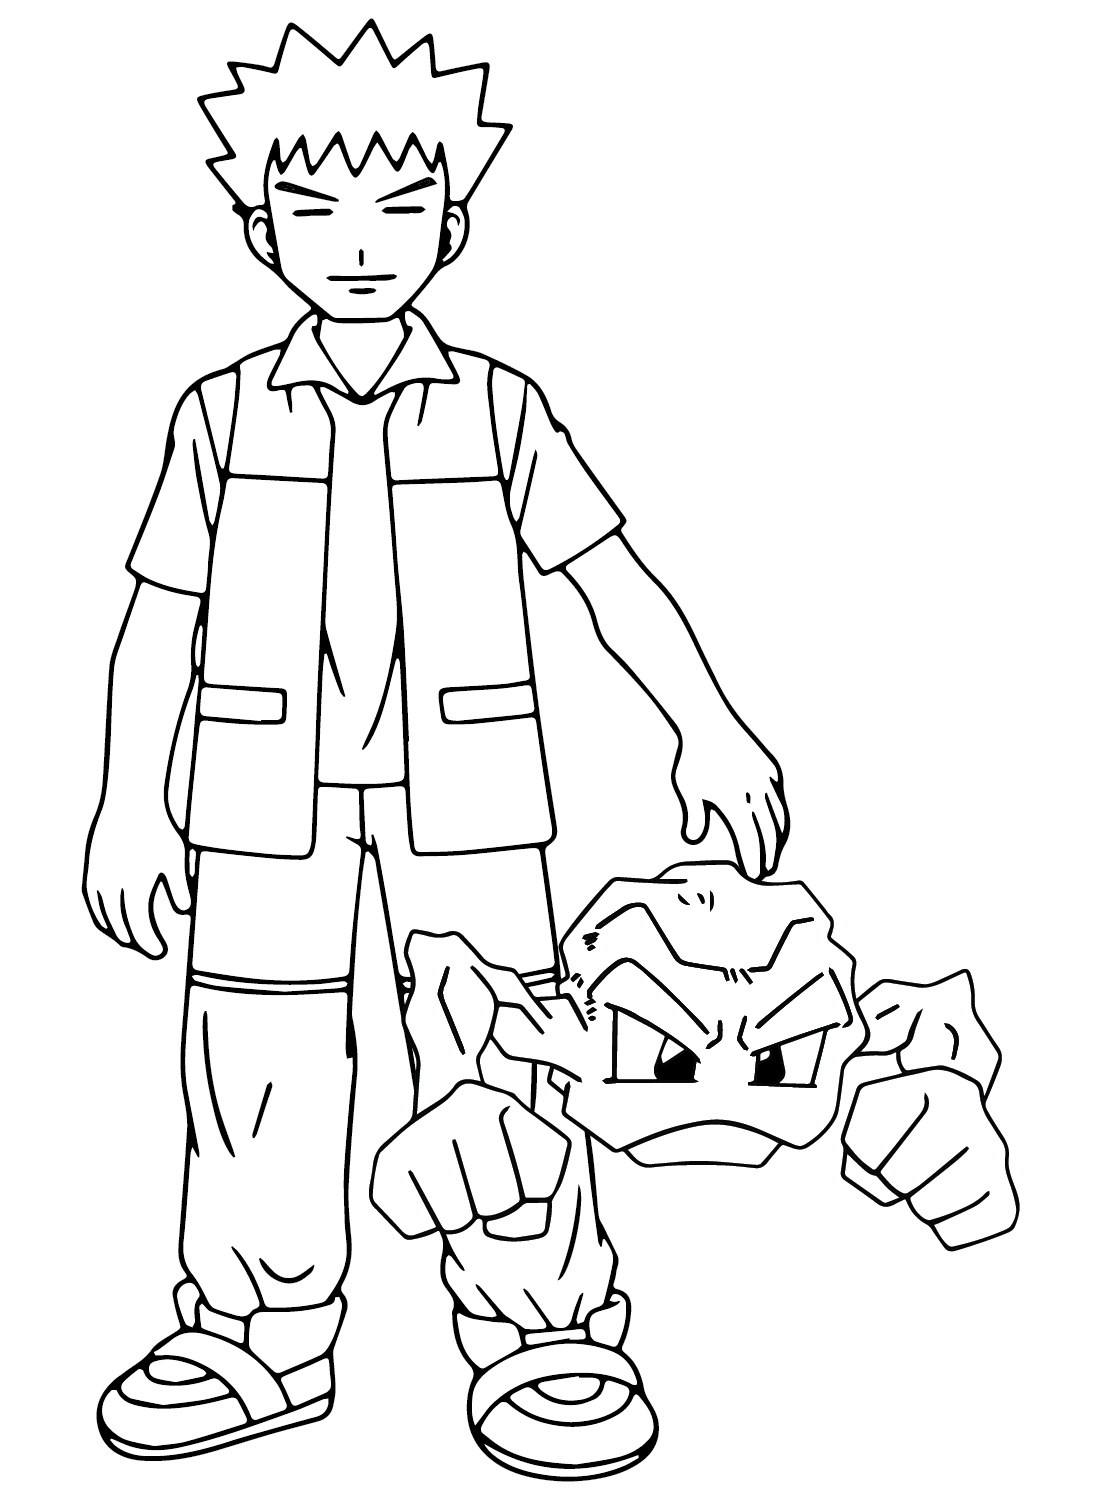 Pokemon Brock Coloring Page from Brock